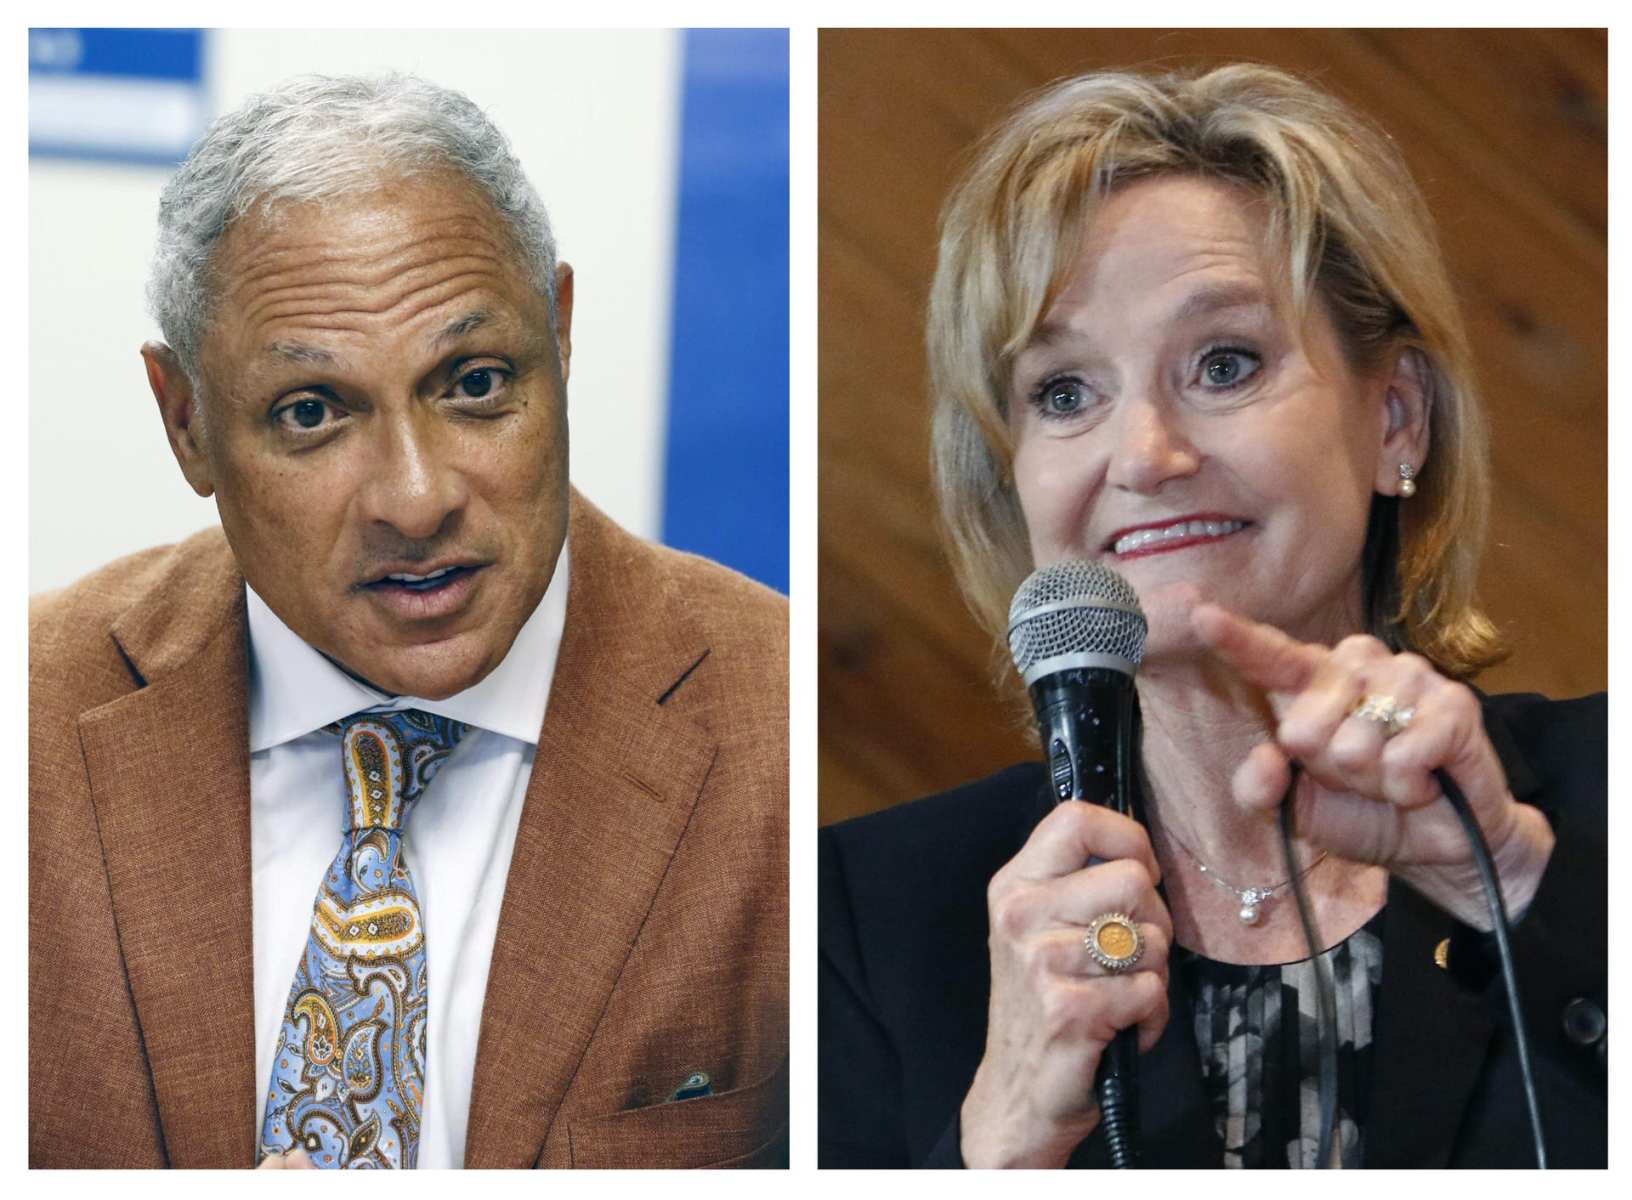 A photo composite of Mississippi U.S. candidates Mike Espy and Cindy Hyde-Smith.